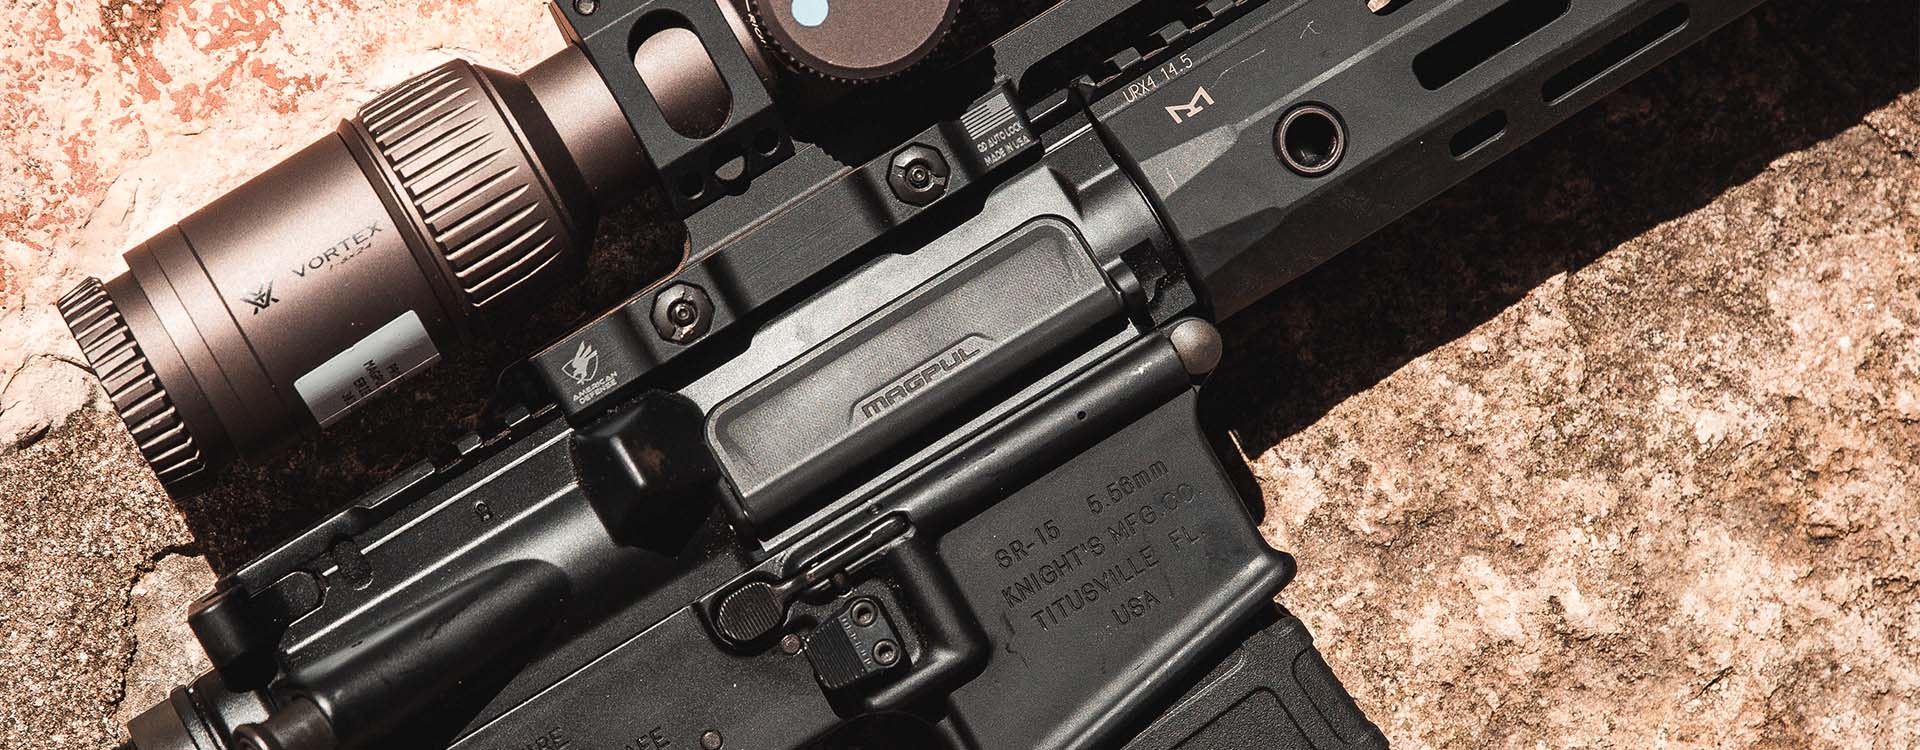 Magpul AR-15 Enhanced Ejection Port Cover - Black | Redcon1 Tactical